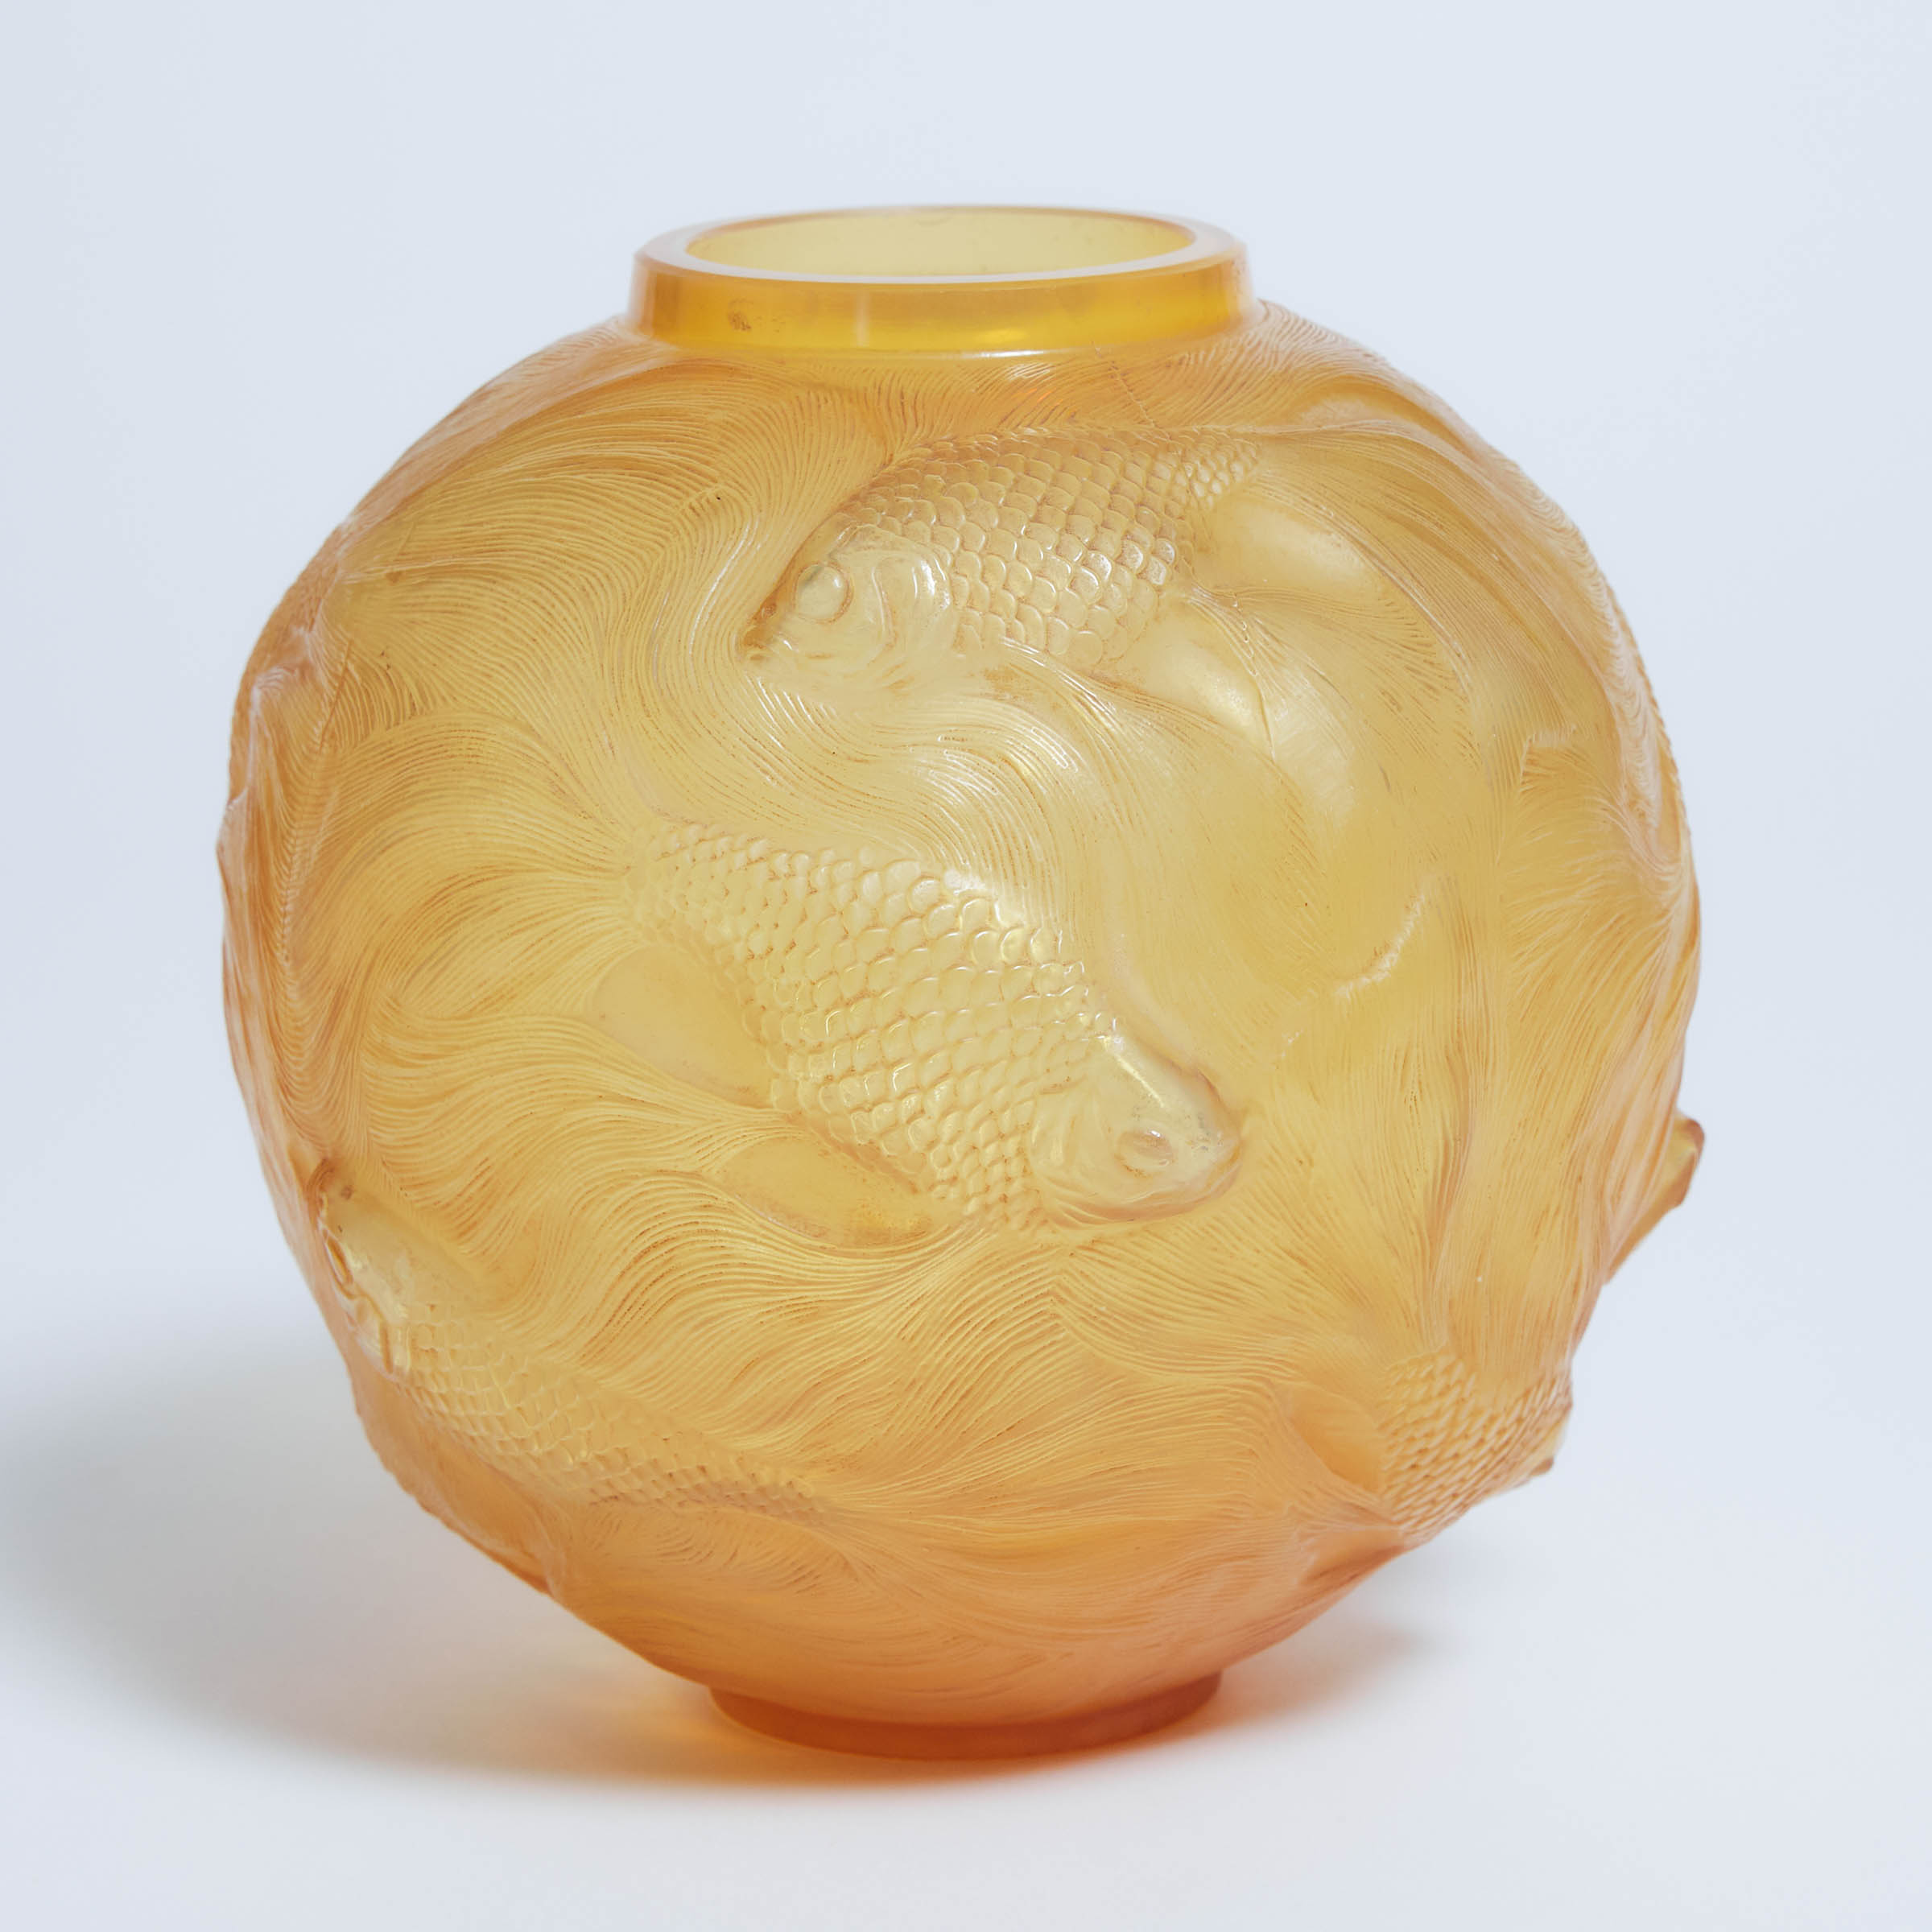 'Formose', Lalique Moulded and Partly Frosted Amber Glass Vase, c.1930